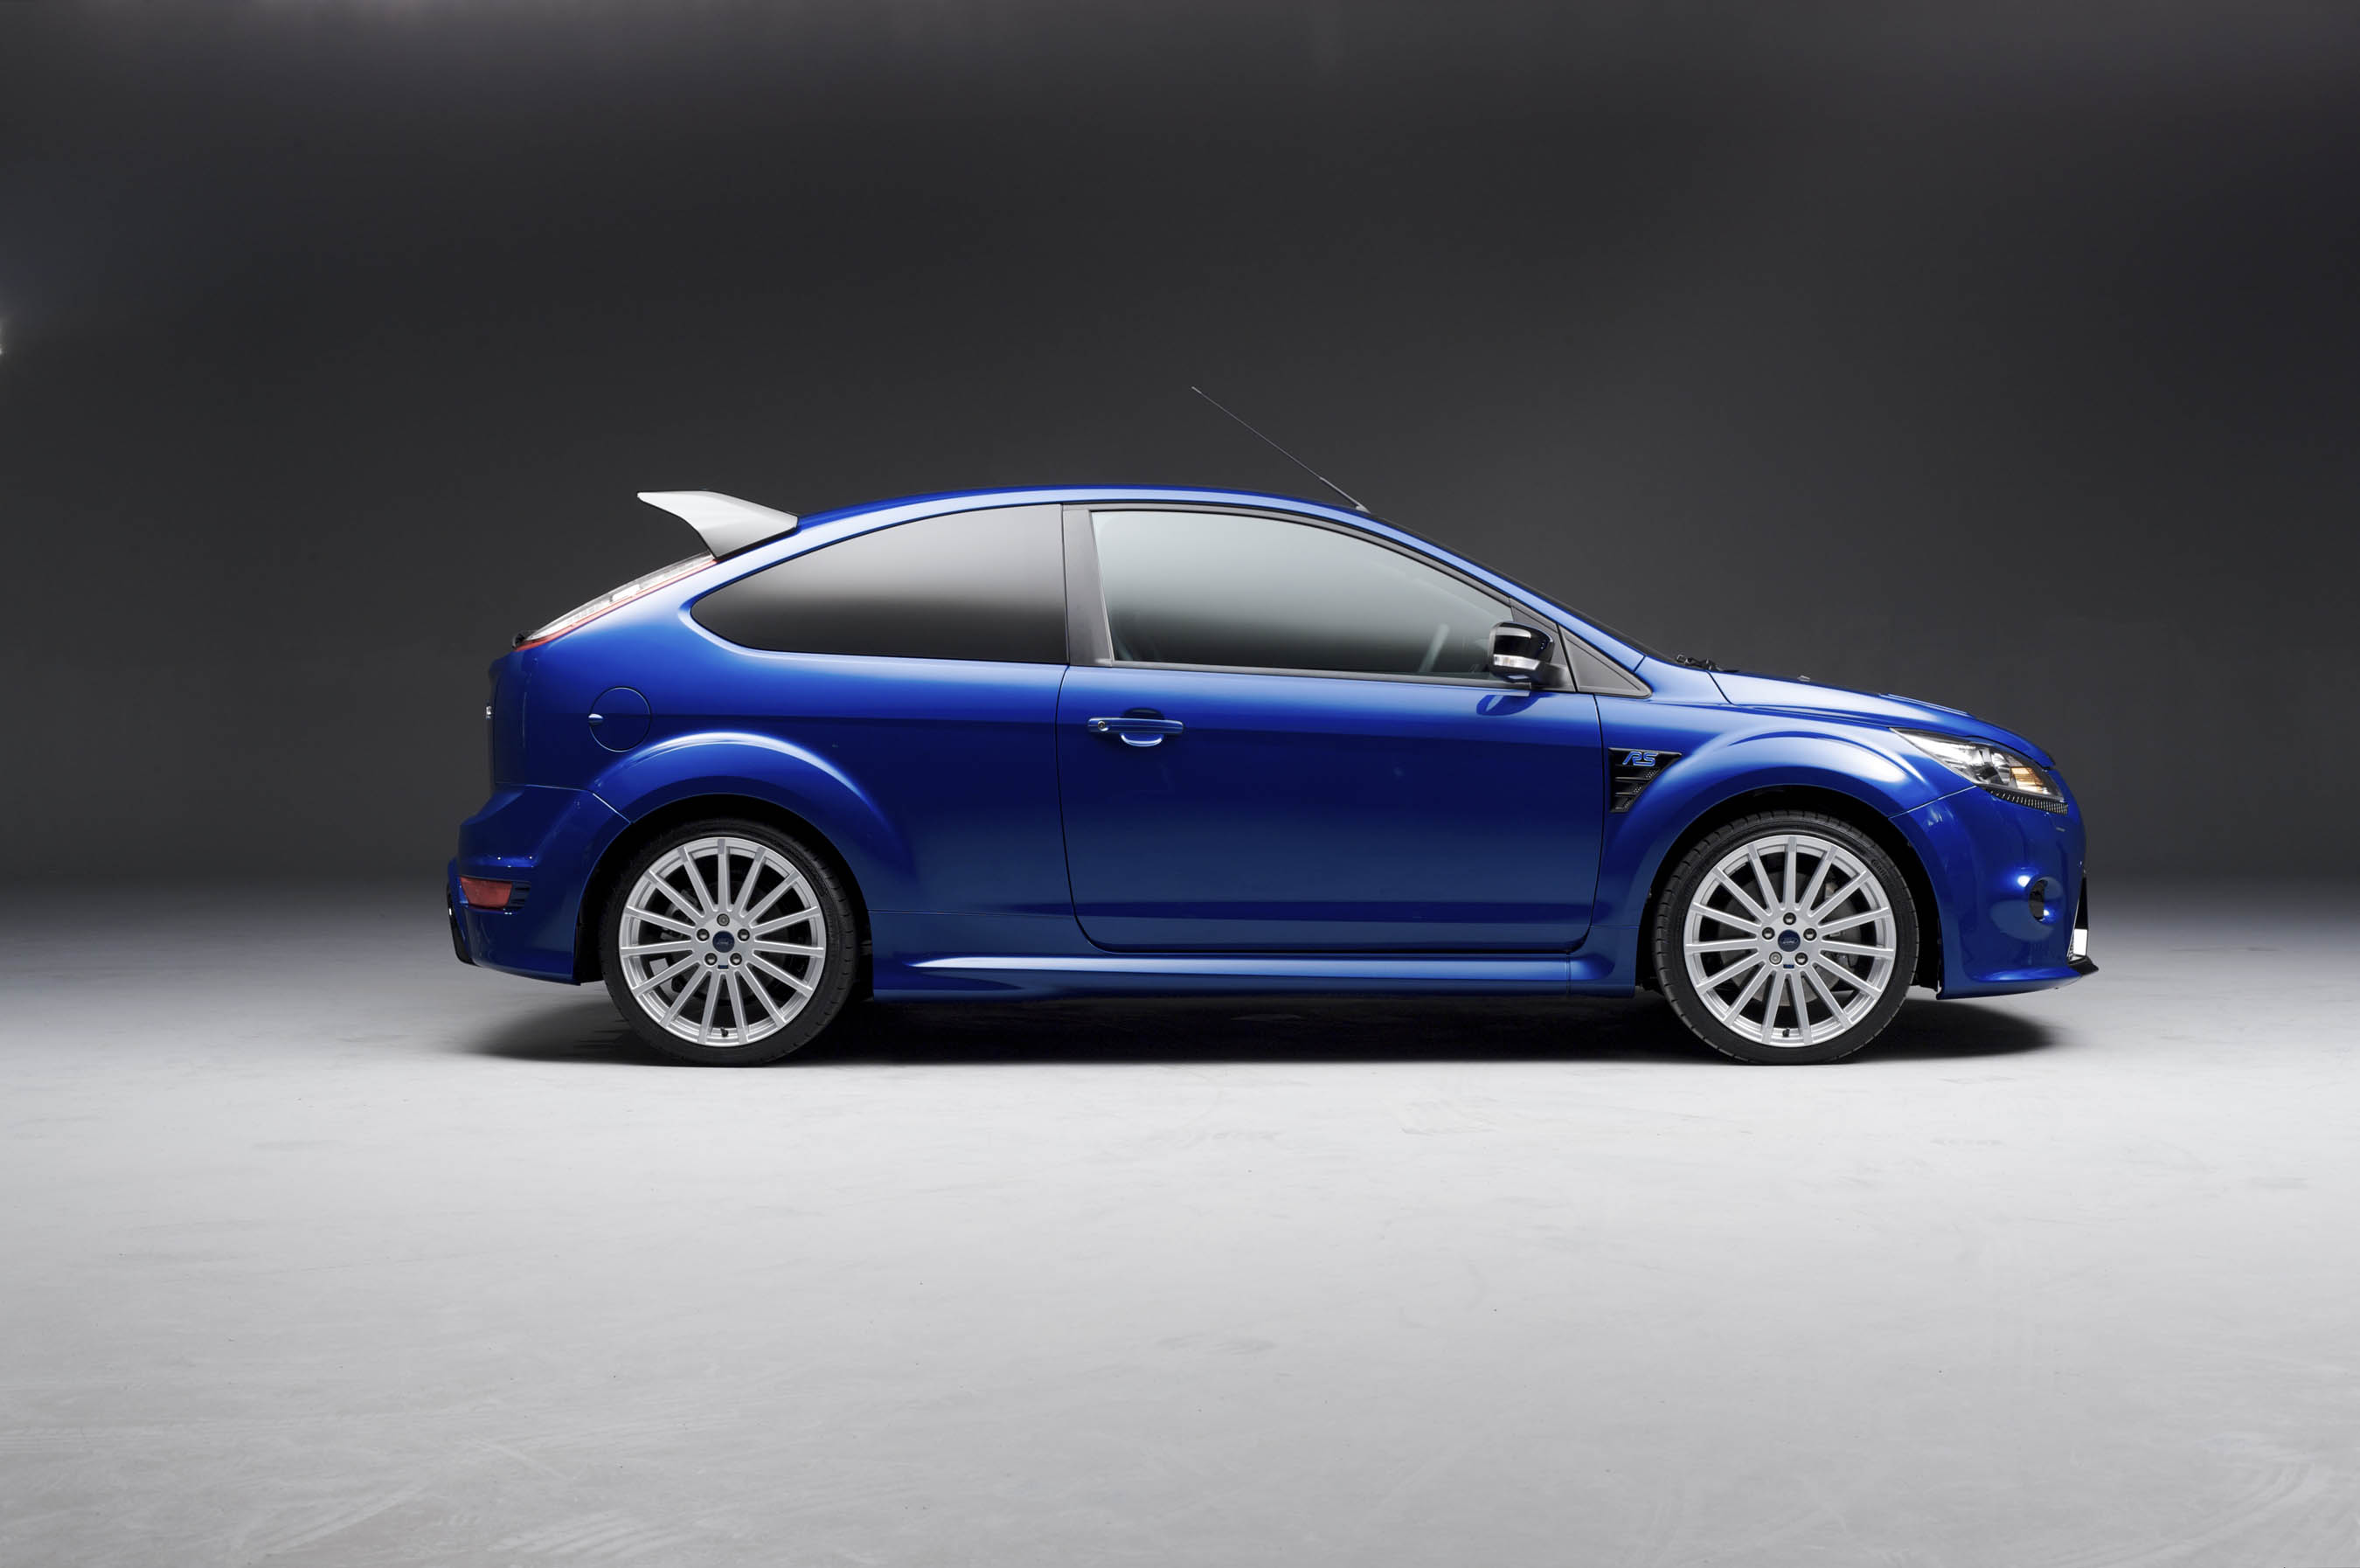 2008 Ford Focus RS - Picture 115322700 x 1794